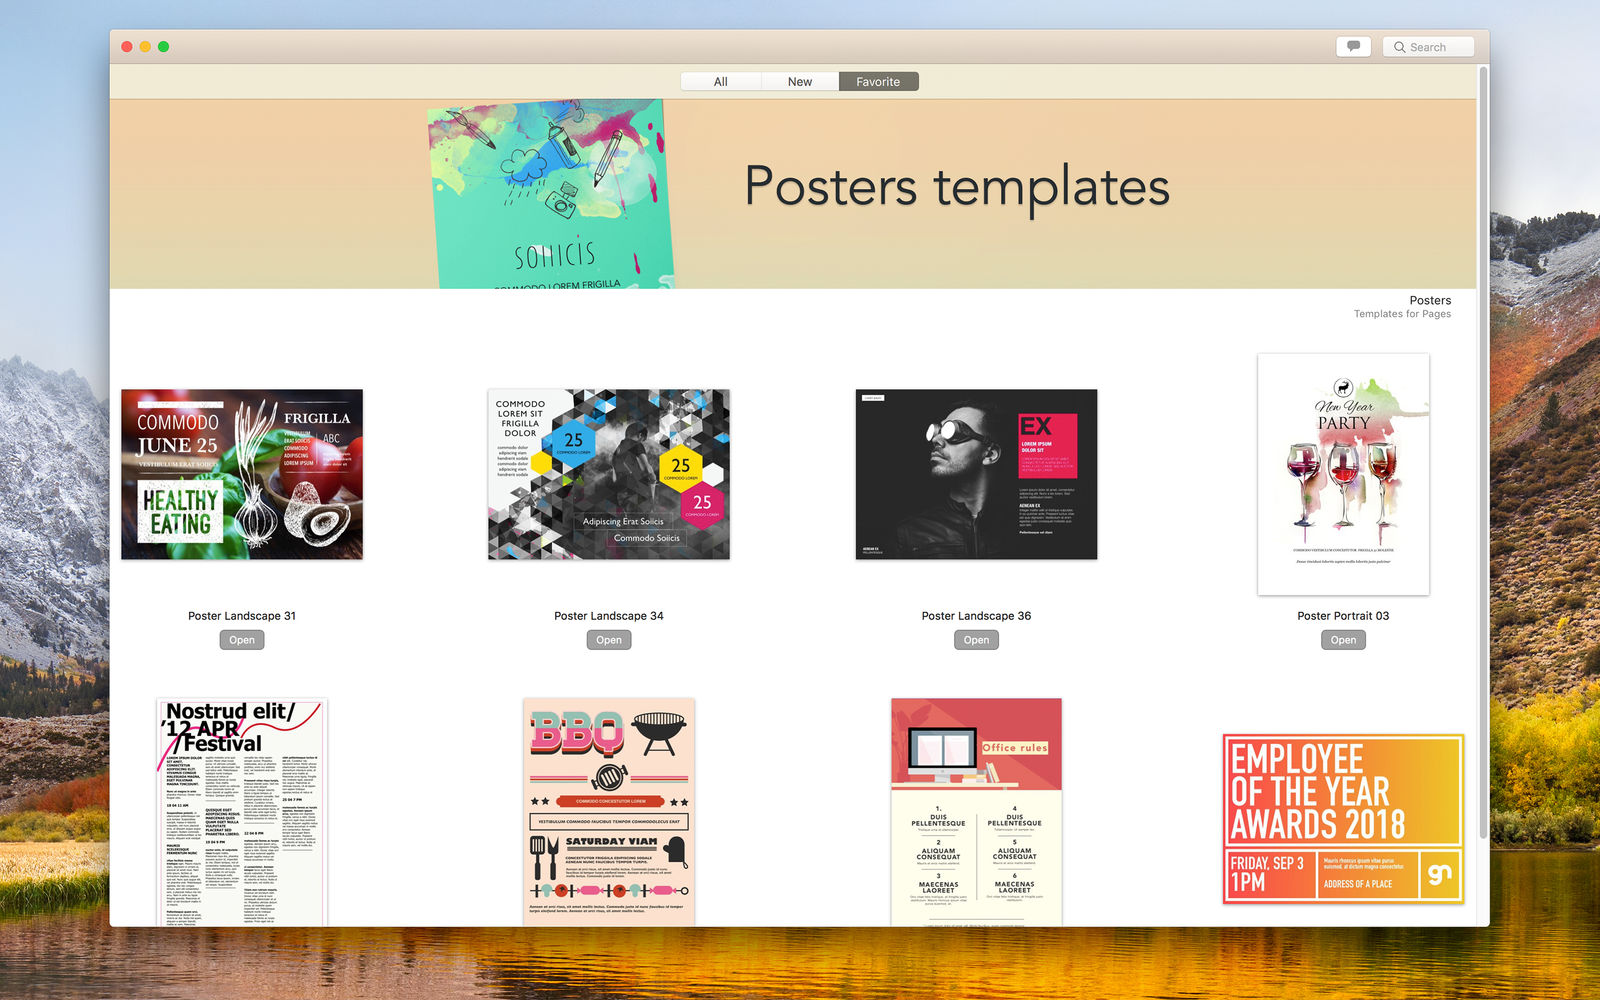 Posters Templates - DesiGN 3.0.1 for Mac|Mac版下载 | Pages宣传单模板合集